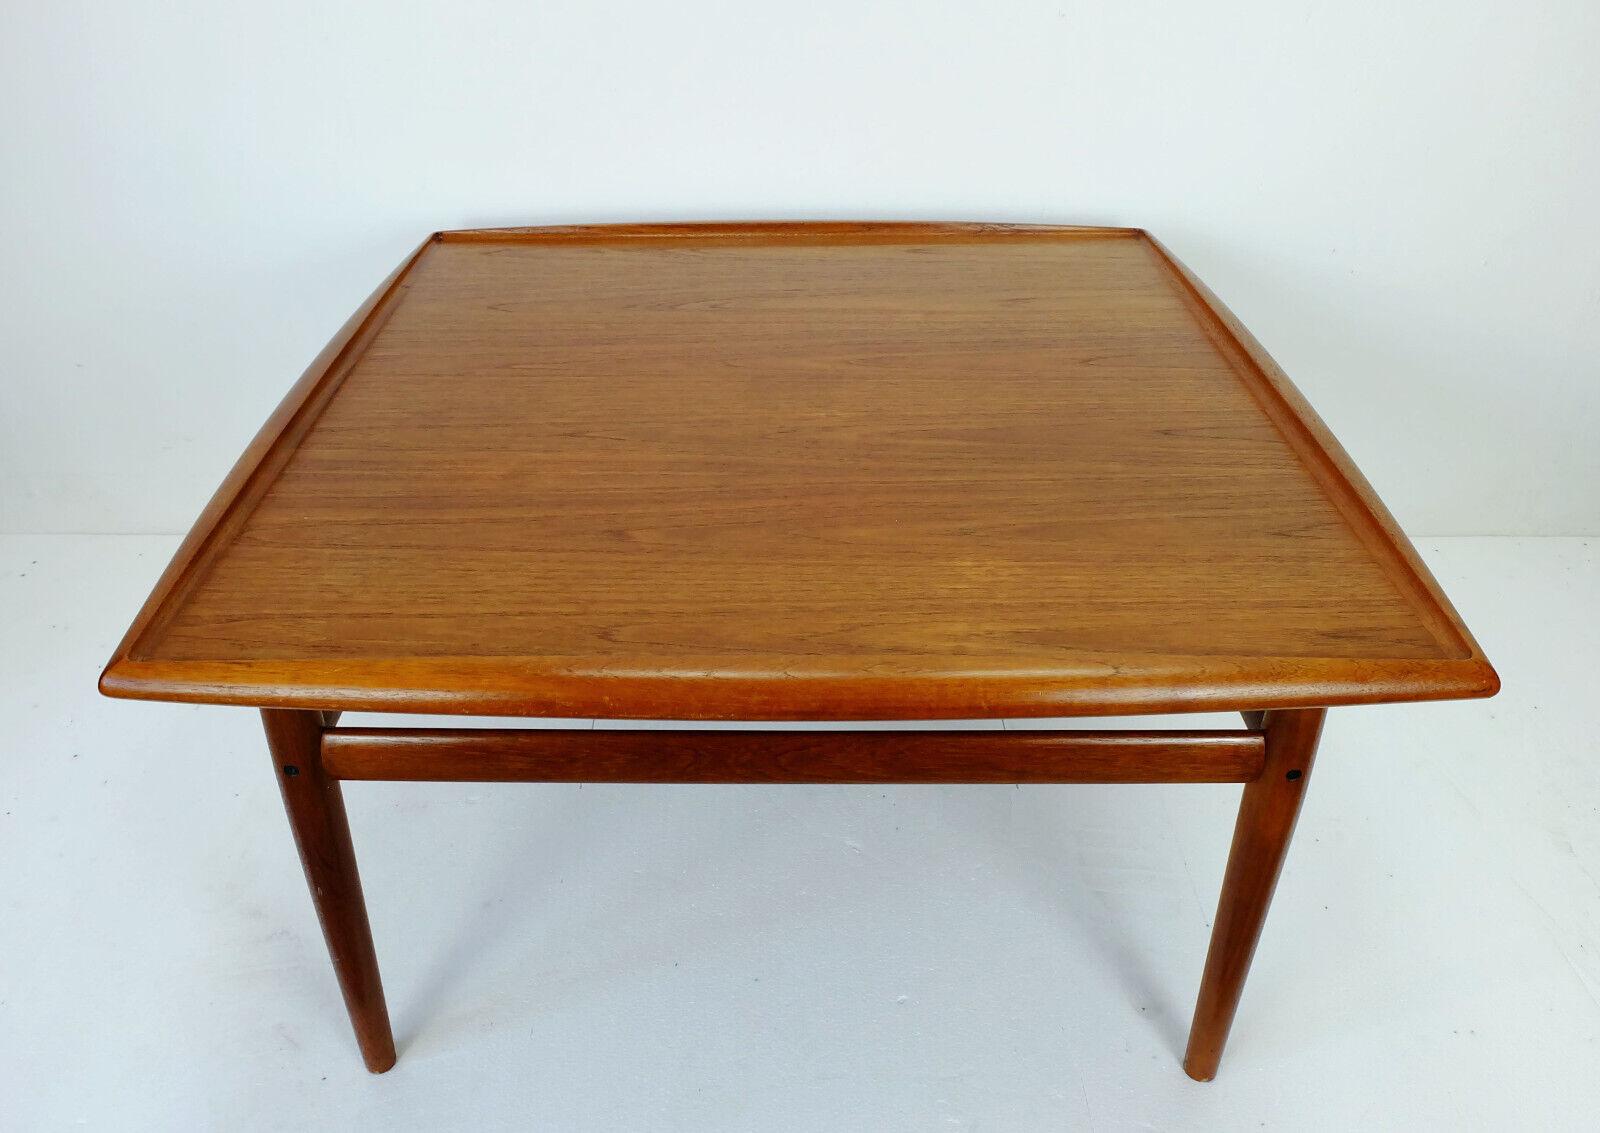 Danish modern 1960s teak coffee table designed by Grete Jalk. Legs and rim solid teak wood, table top teak veneer.

Pre-used, good condition, minor traces of use and age.

Dimensions: width and depth 37 2 / 5